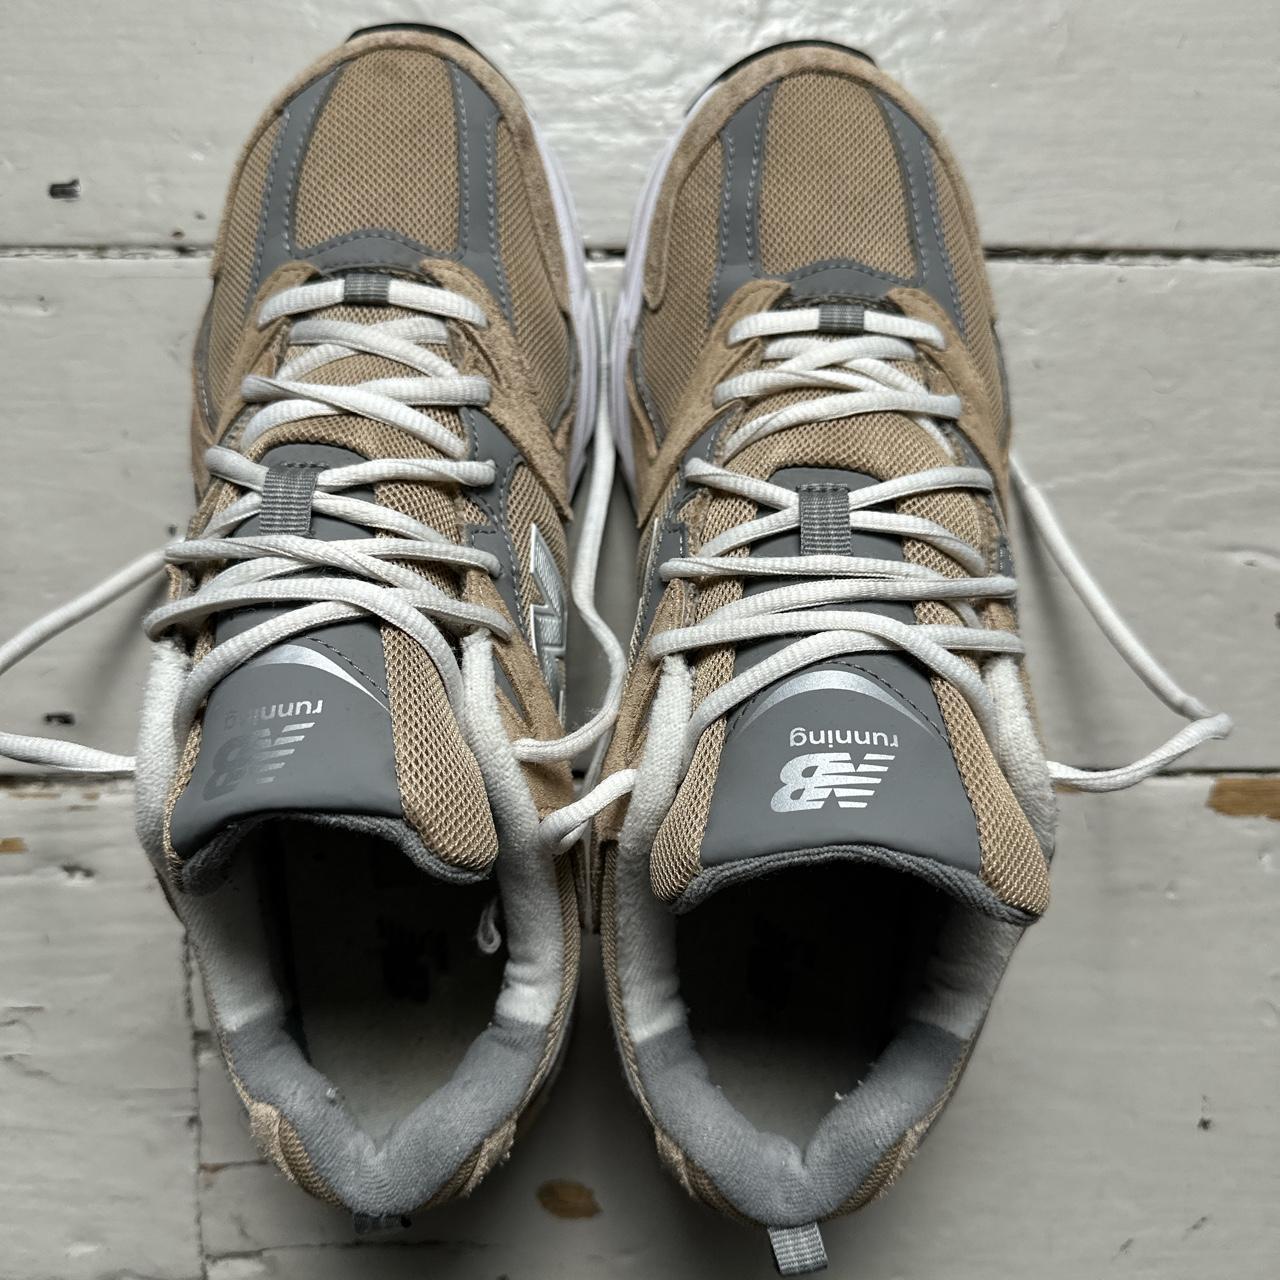 New Balance 530 Beige Grey and White Trainers